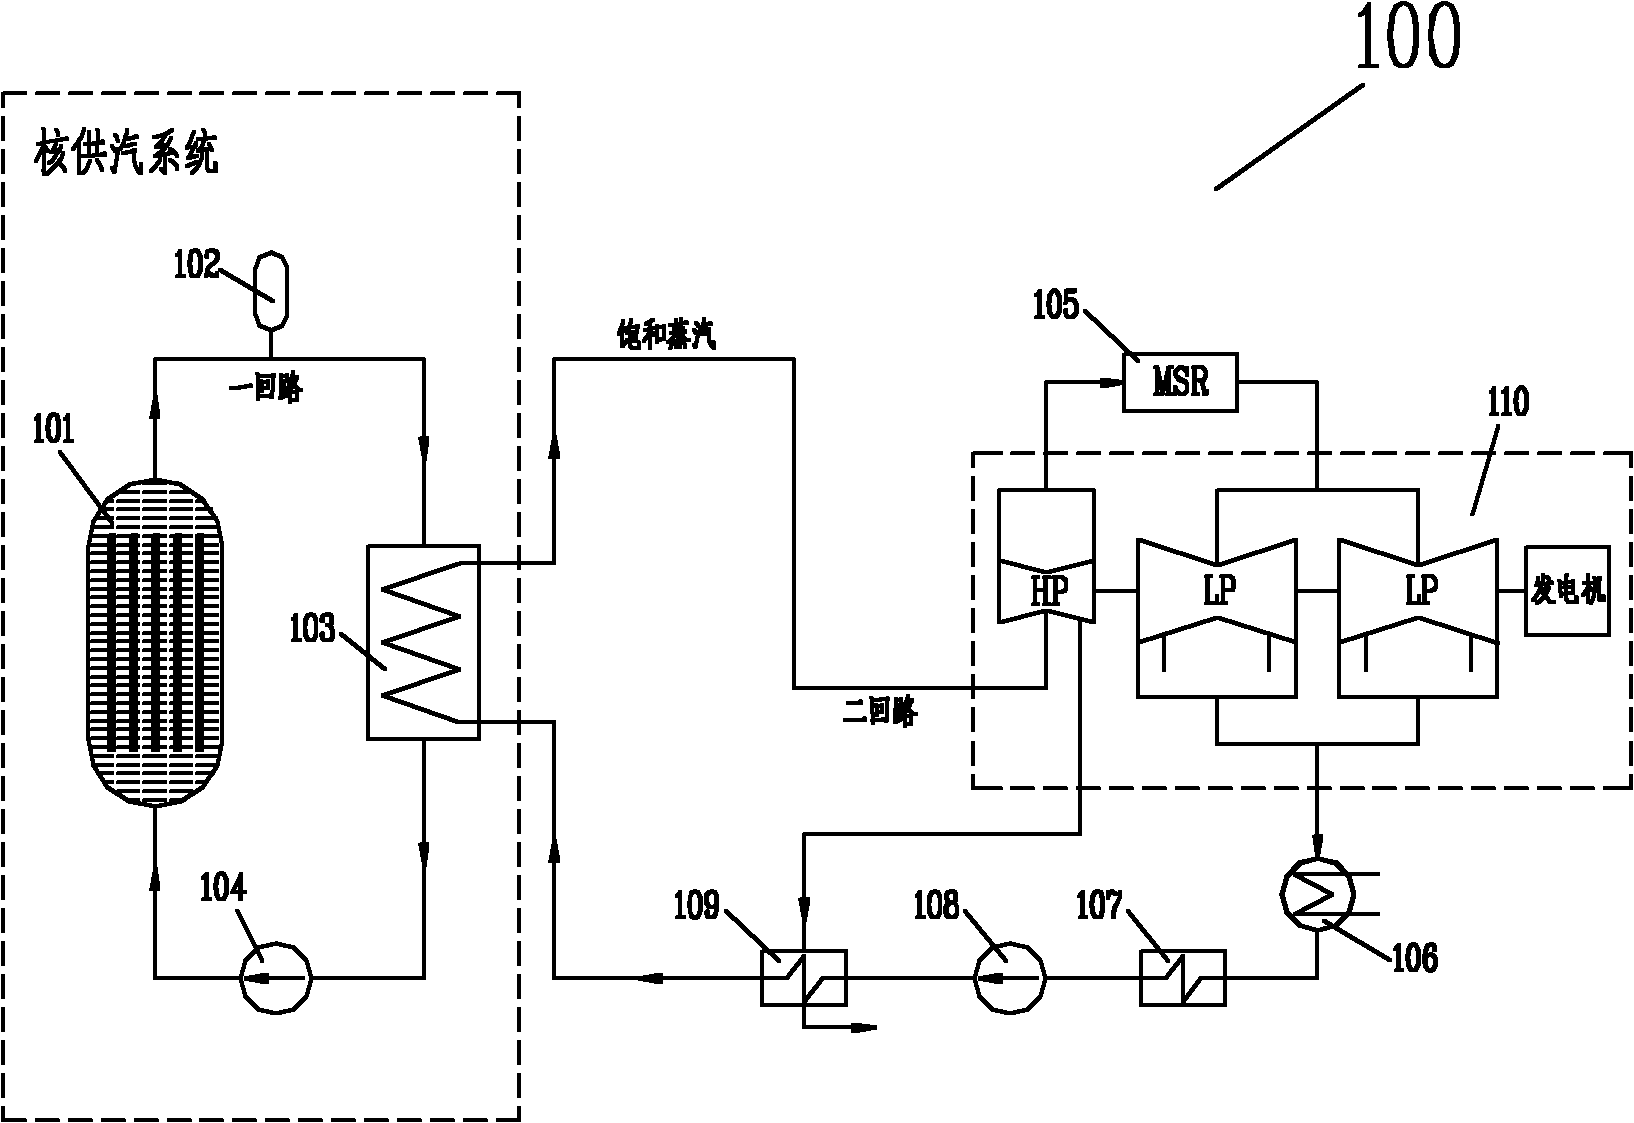 Method and system for generating power jointly by nuclear fuel and fossil fuel